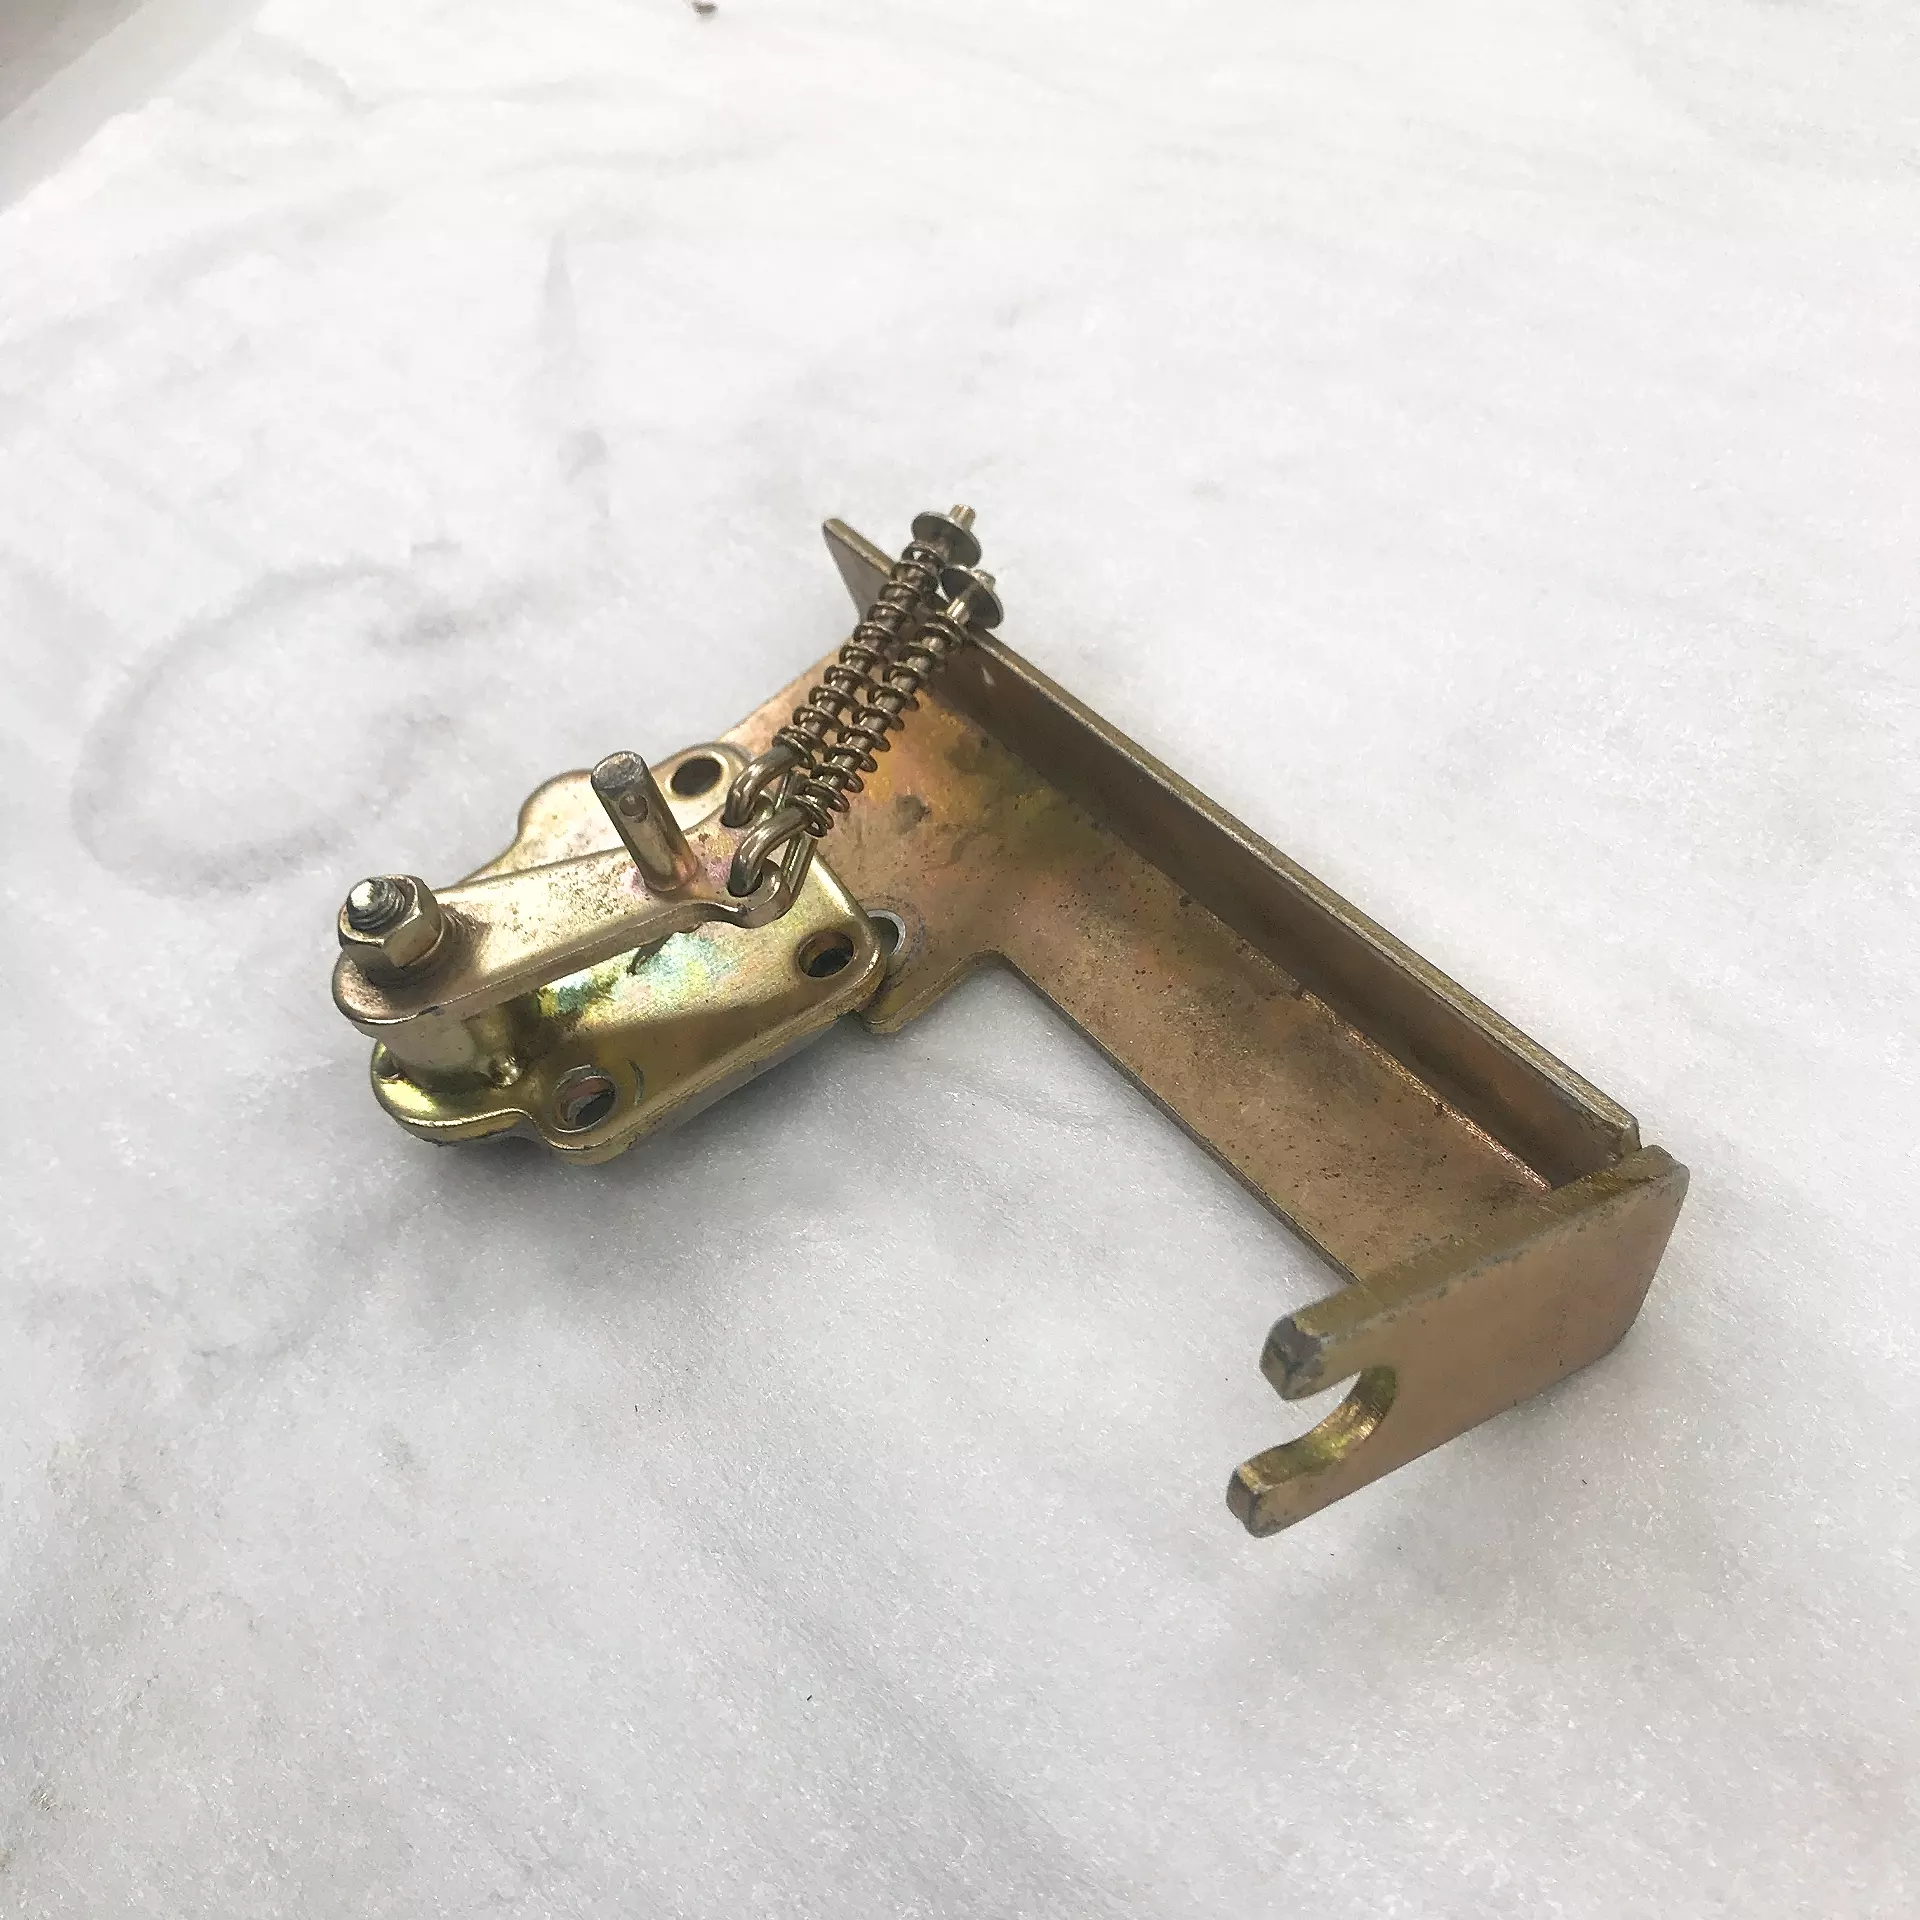 DAYANG motorcycle rear axle full flotaing booster king spare parts  Shift bracket  factory direct sale high performance  cheap